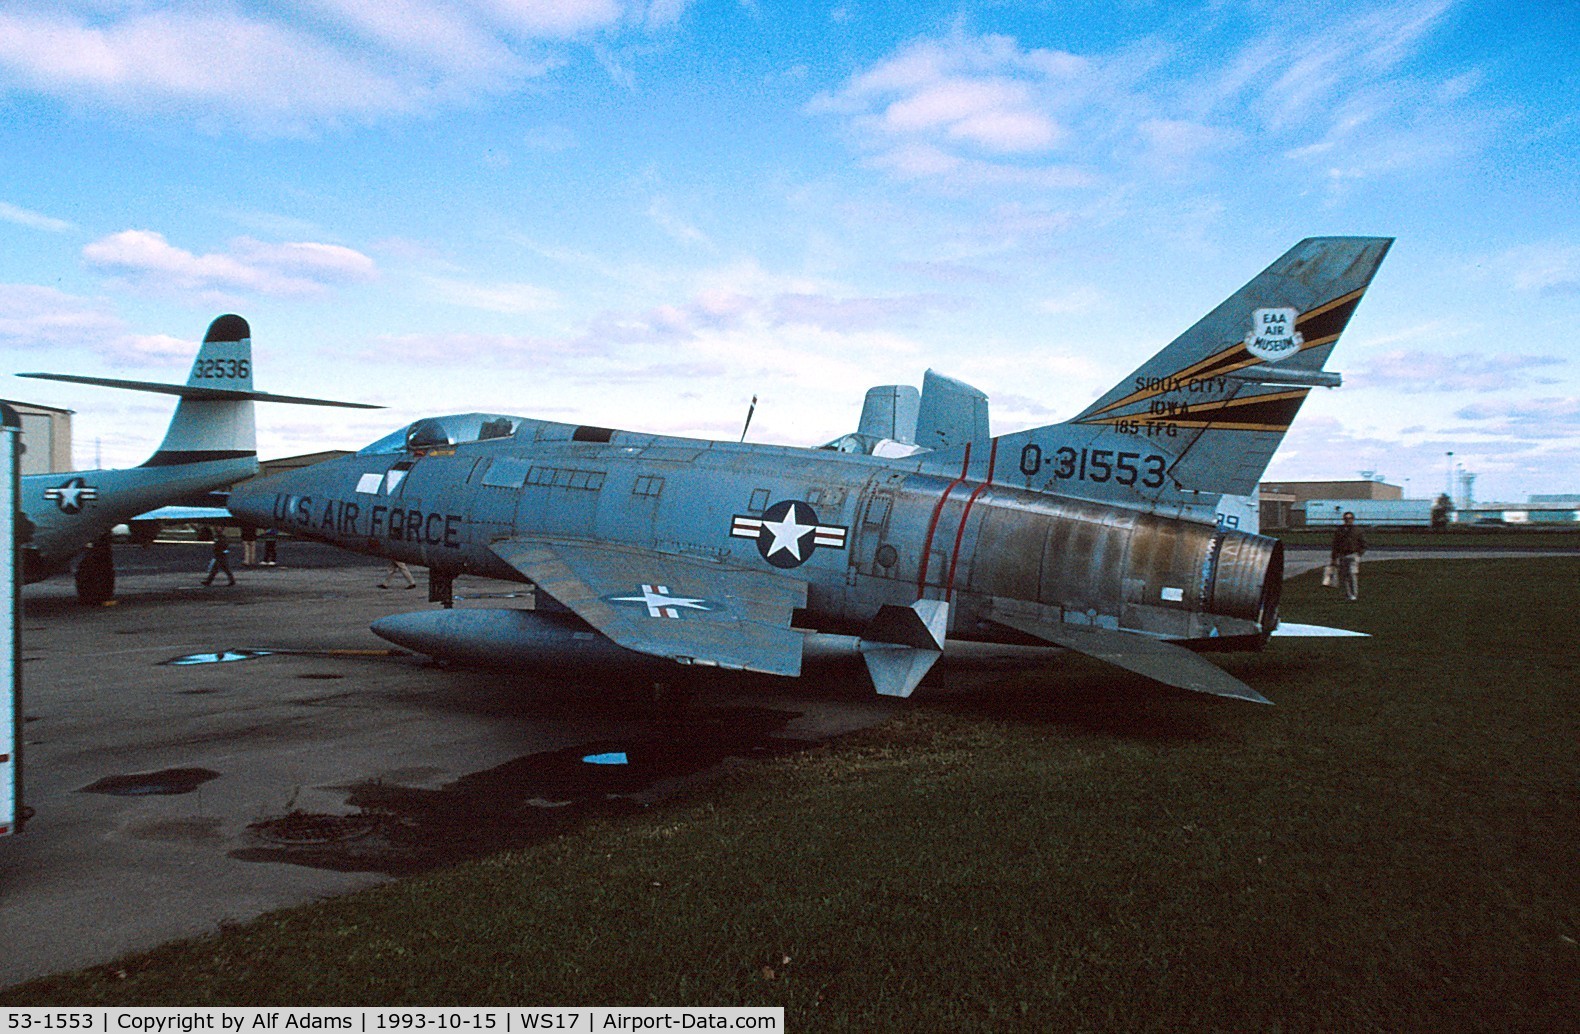 53-1553, 1953 North American F-100A Super Sabre C/N 192-48, At the EAA Museum, Oshkosh, WI in 1993.